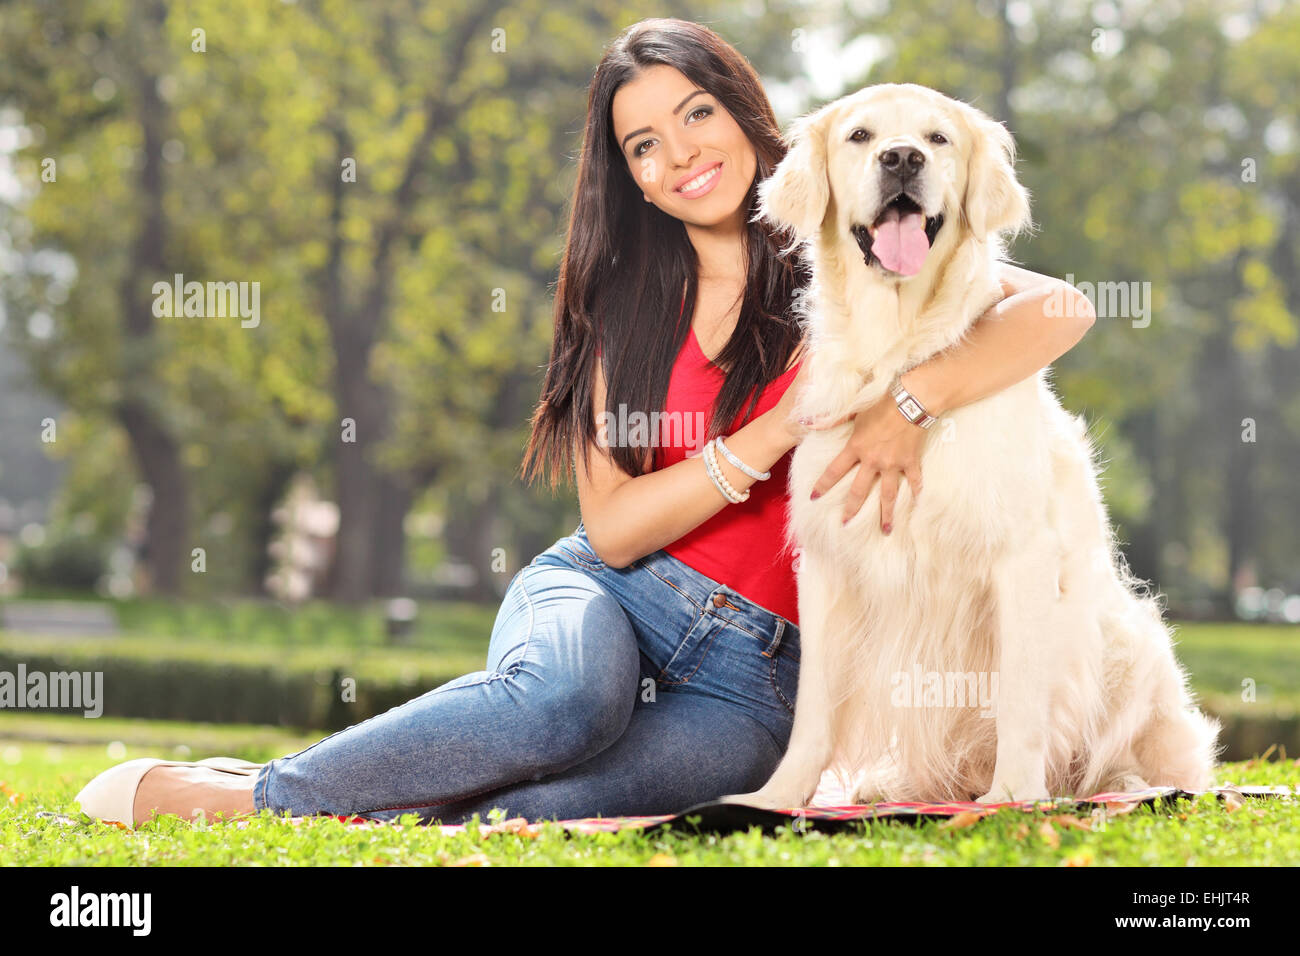 Young girl posing with her dog in a park Stock Photo